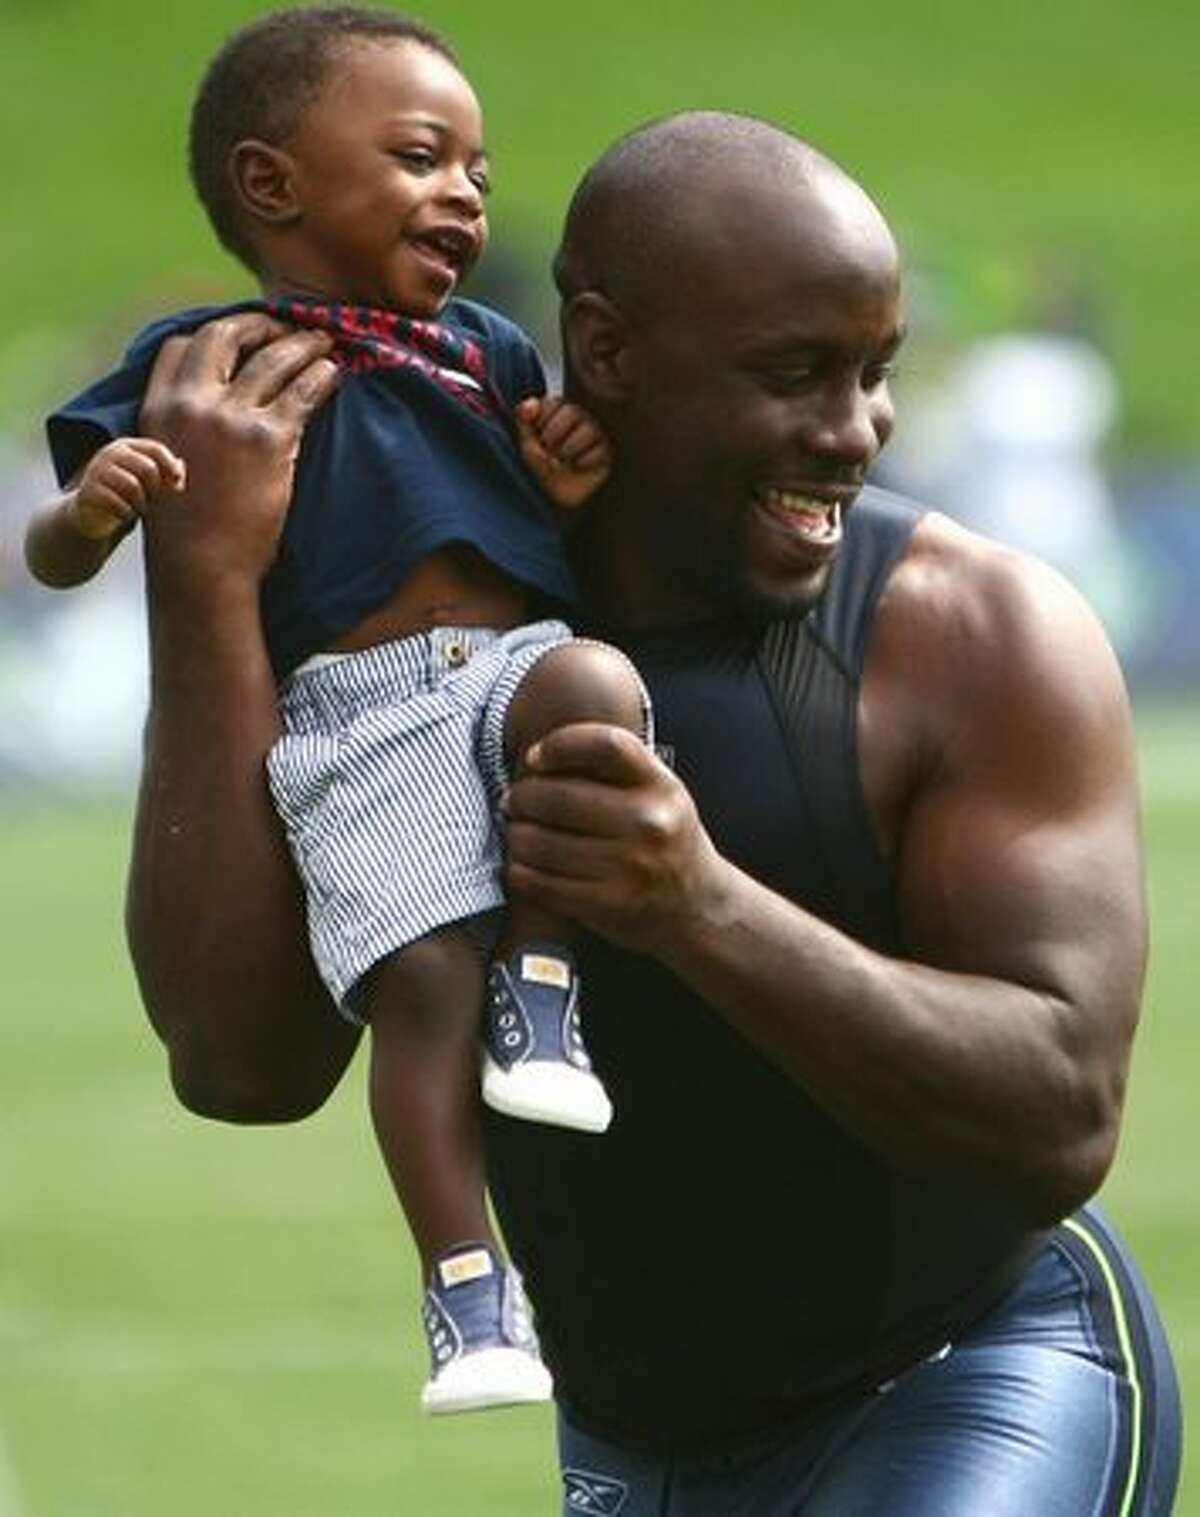 Seattle Seahawk Leon Washington carries his son Noel, 1, after a team practice at the Virginia Mason Athletic Center in Renton.